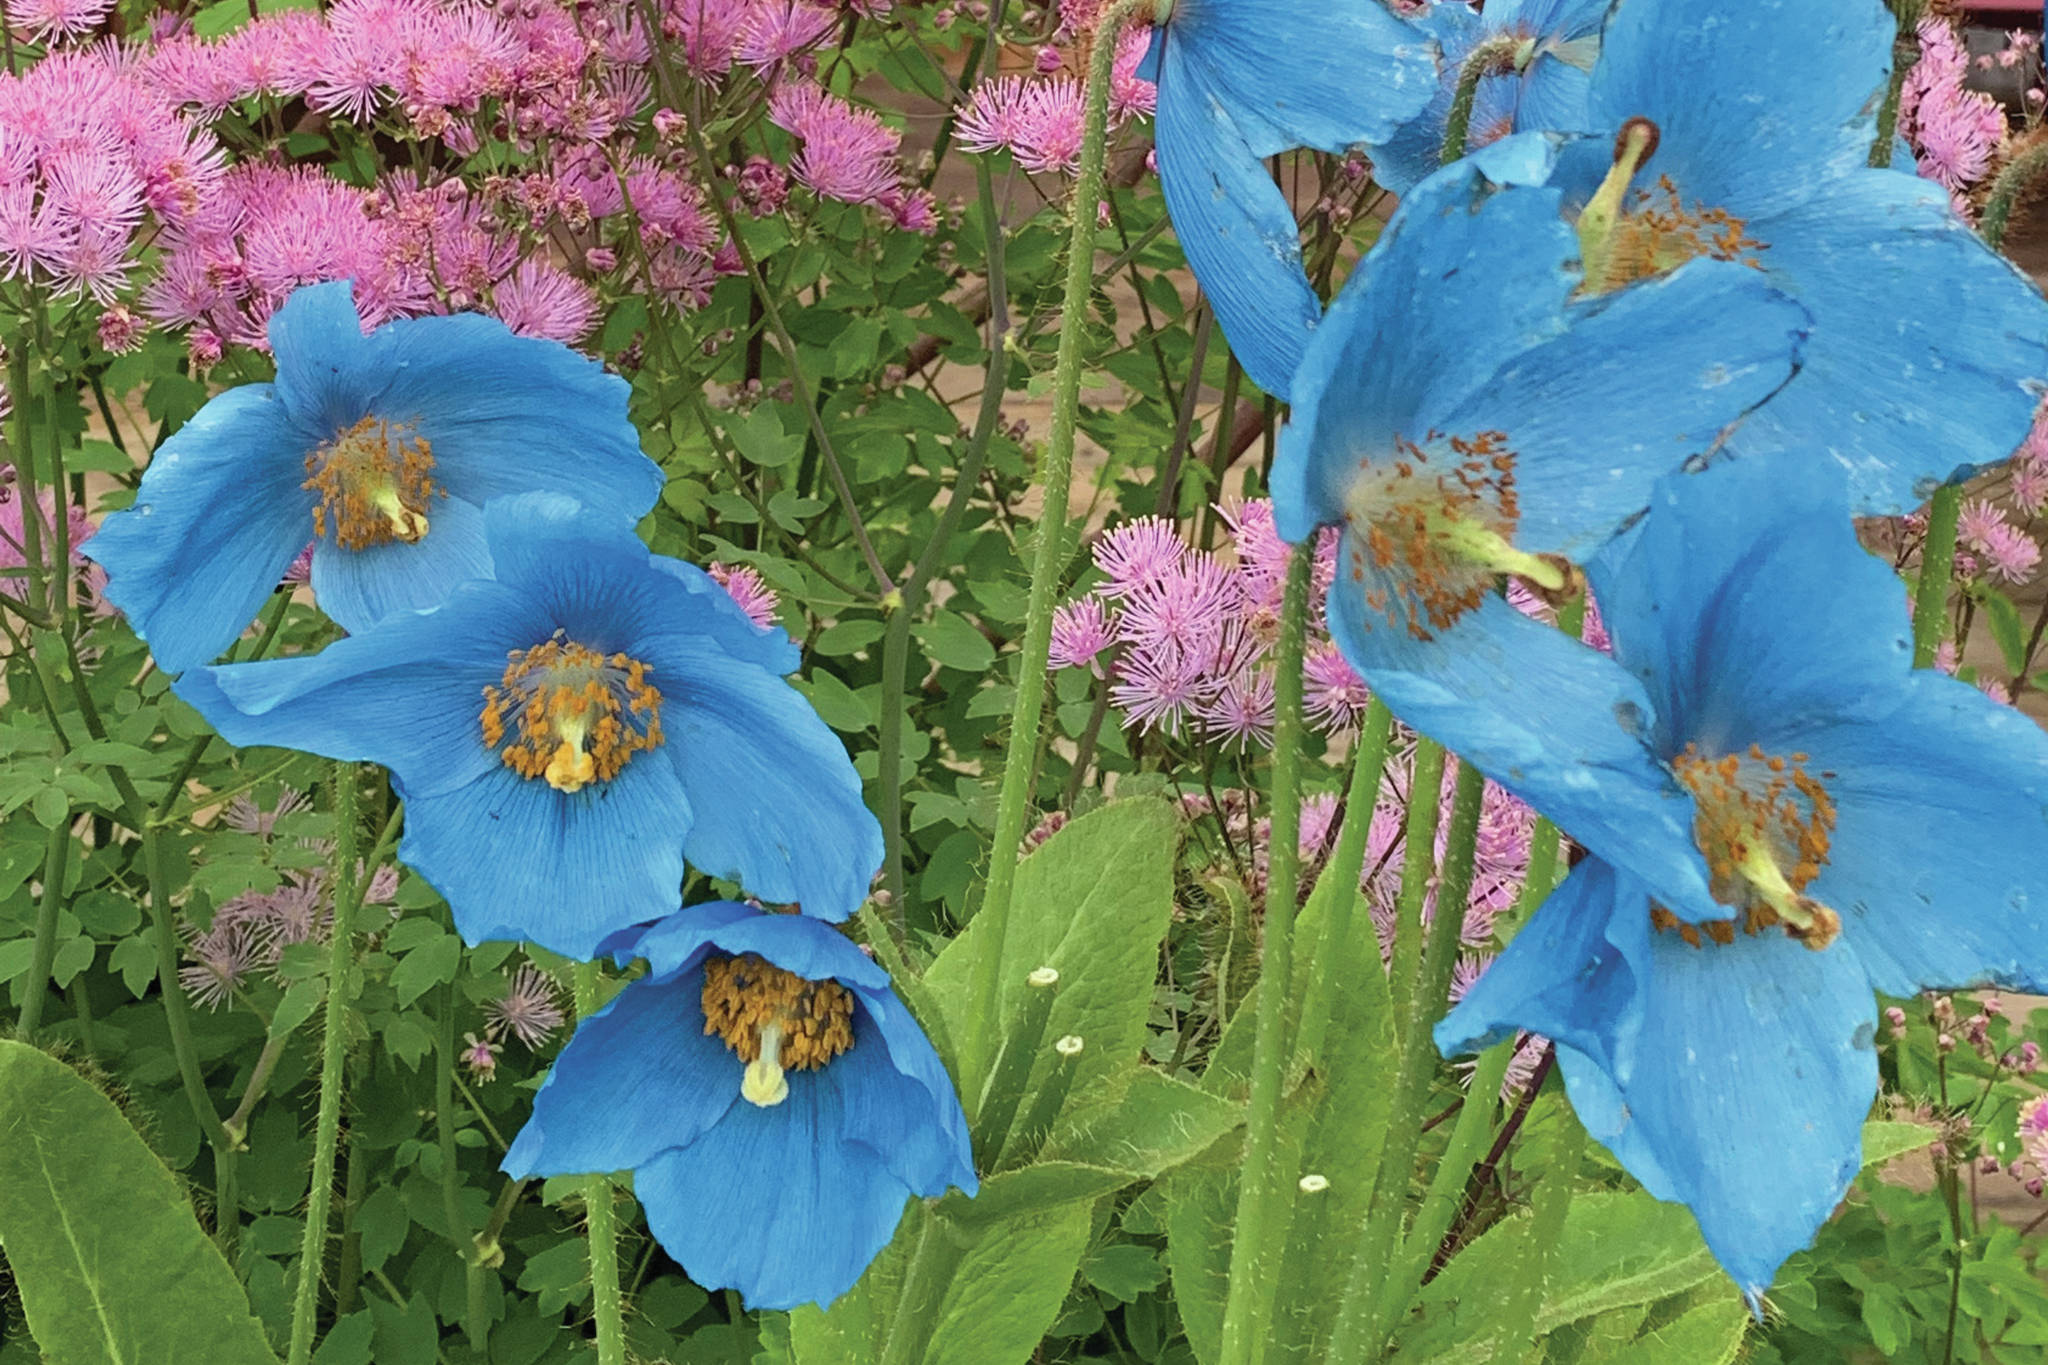 Thalictrum (meadow rue) and meconopsis poppies offer a bright note in the back of an early border. (Photo by Rosemary Fitzpatrick)